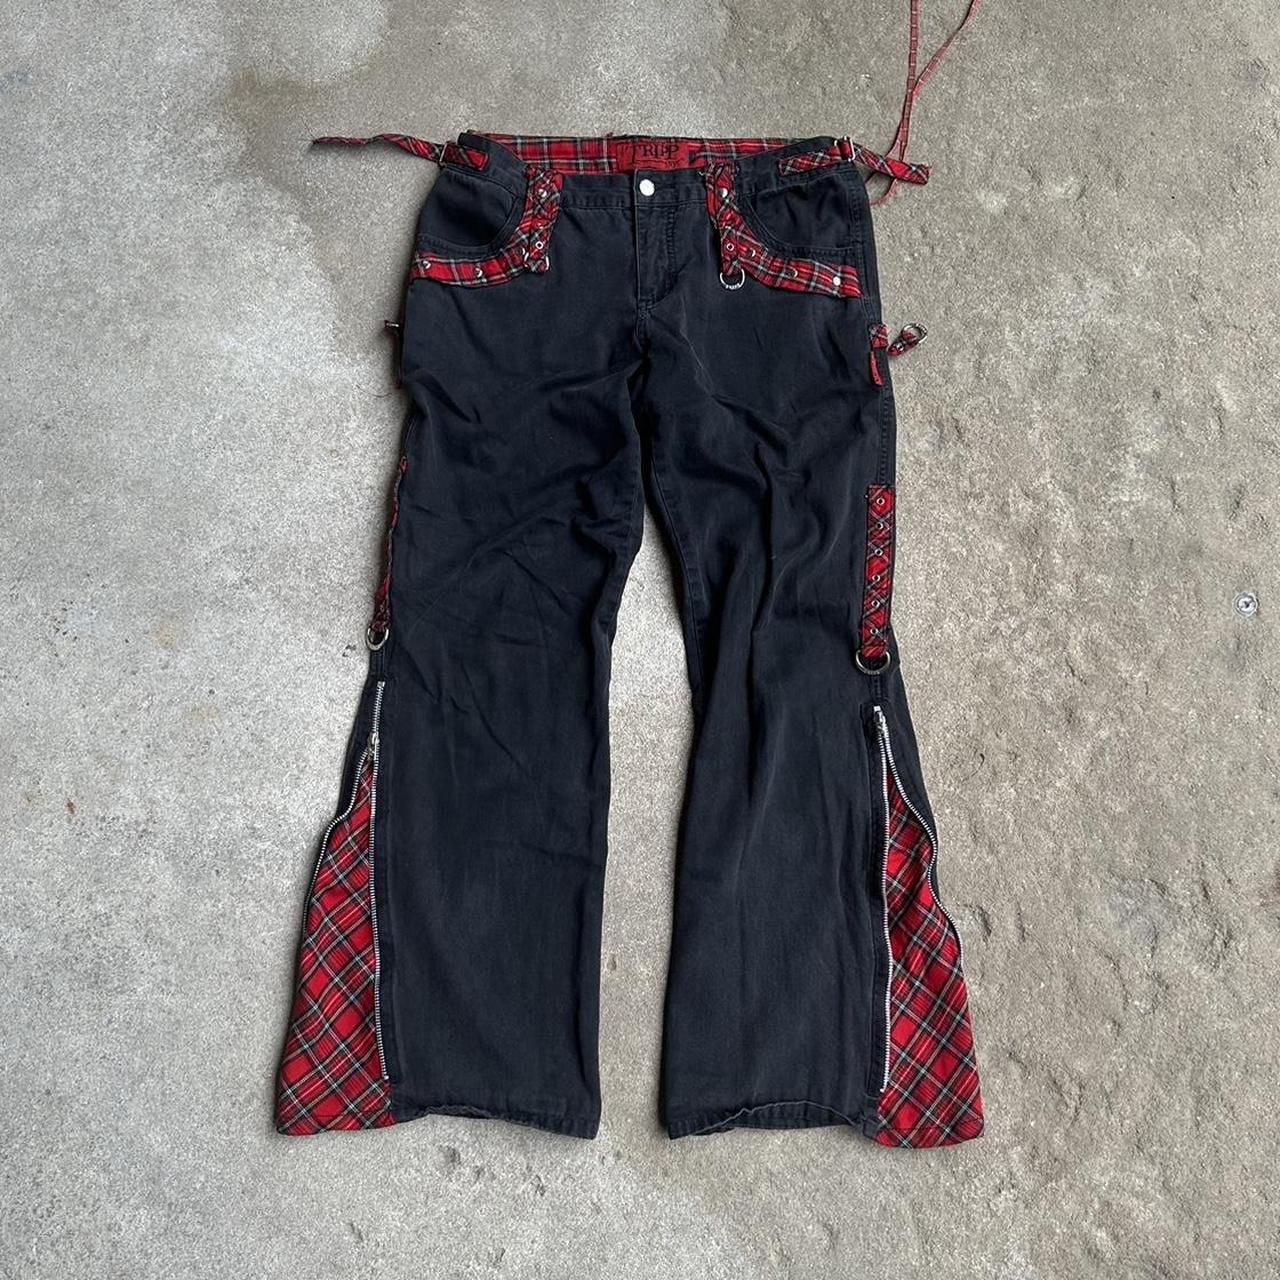 Tripp NYC Women's Black and Red Trousers | Depop